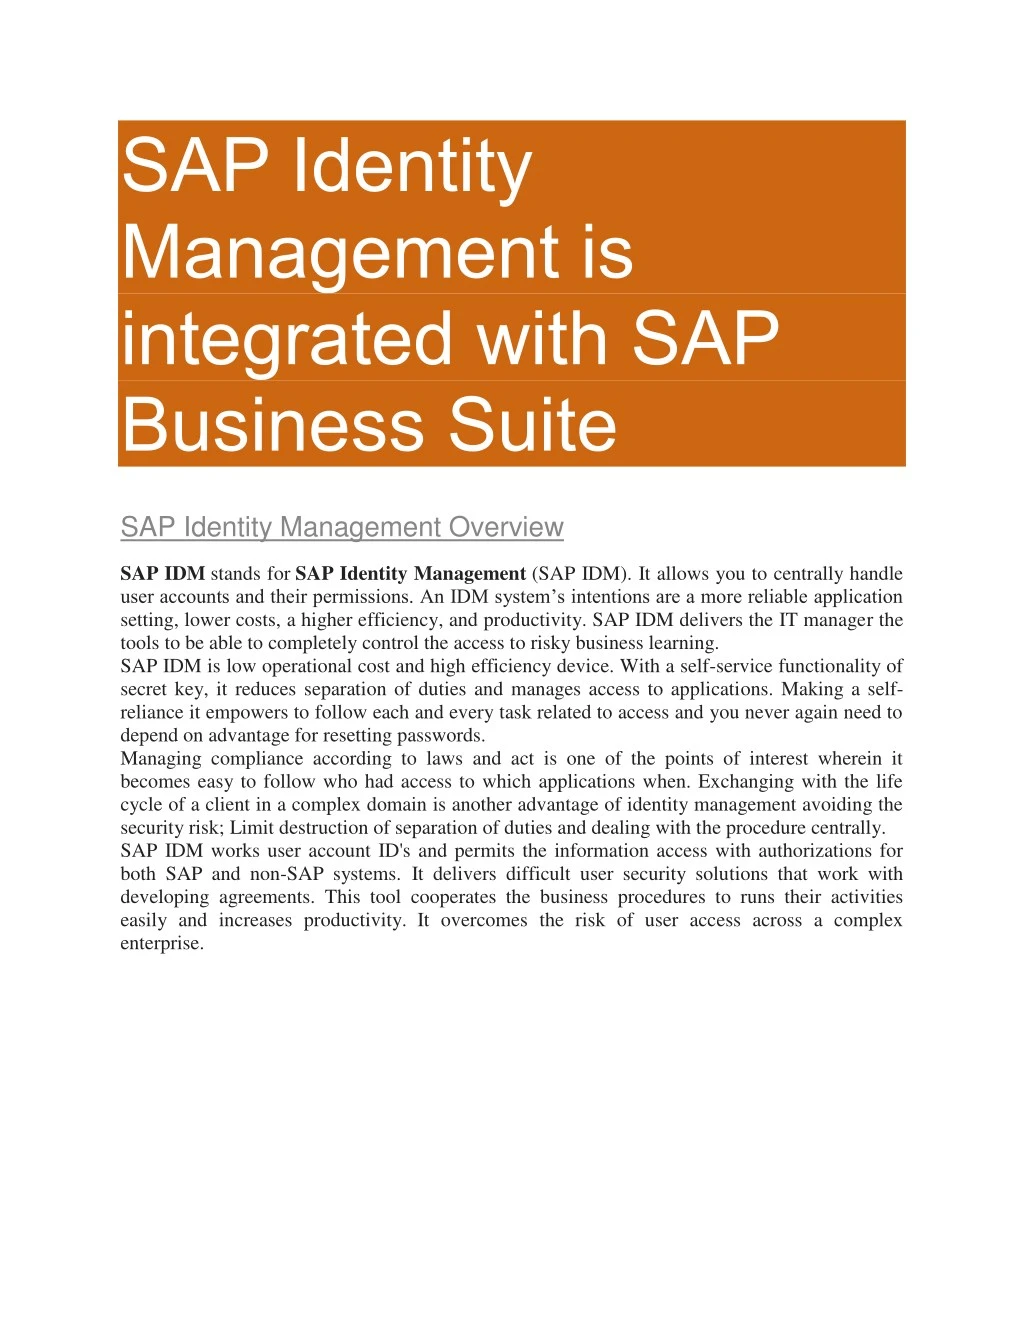 sap identity management is integrated with